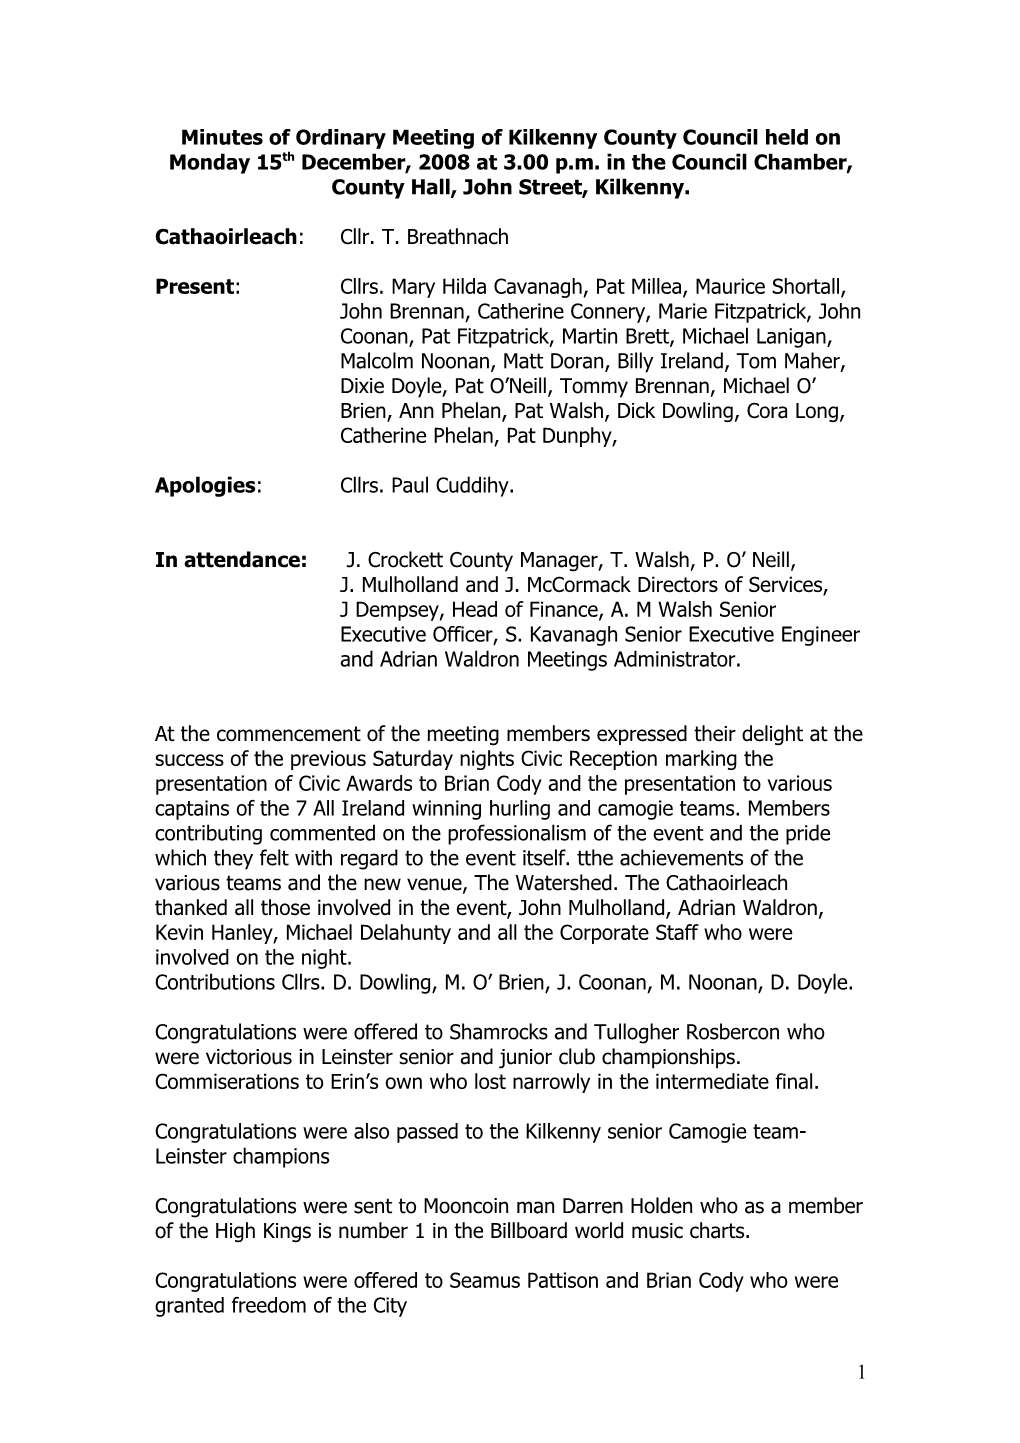 Minutes of Ordinary Meeting of Kilkenny County Council Held on Monday 17Th November, 2008 at 3